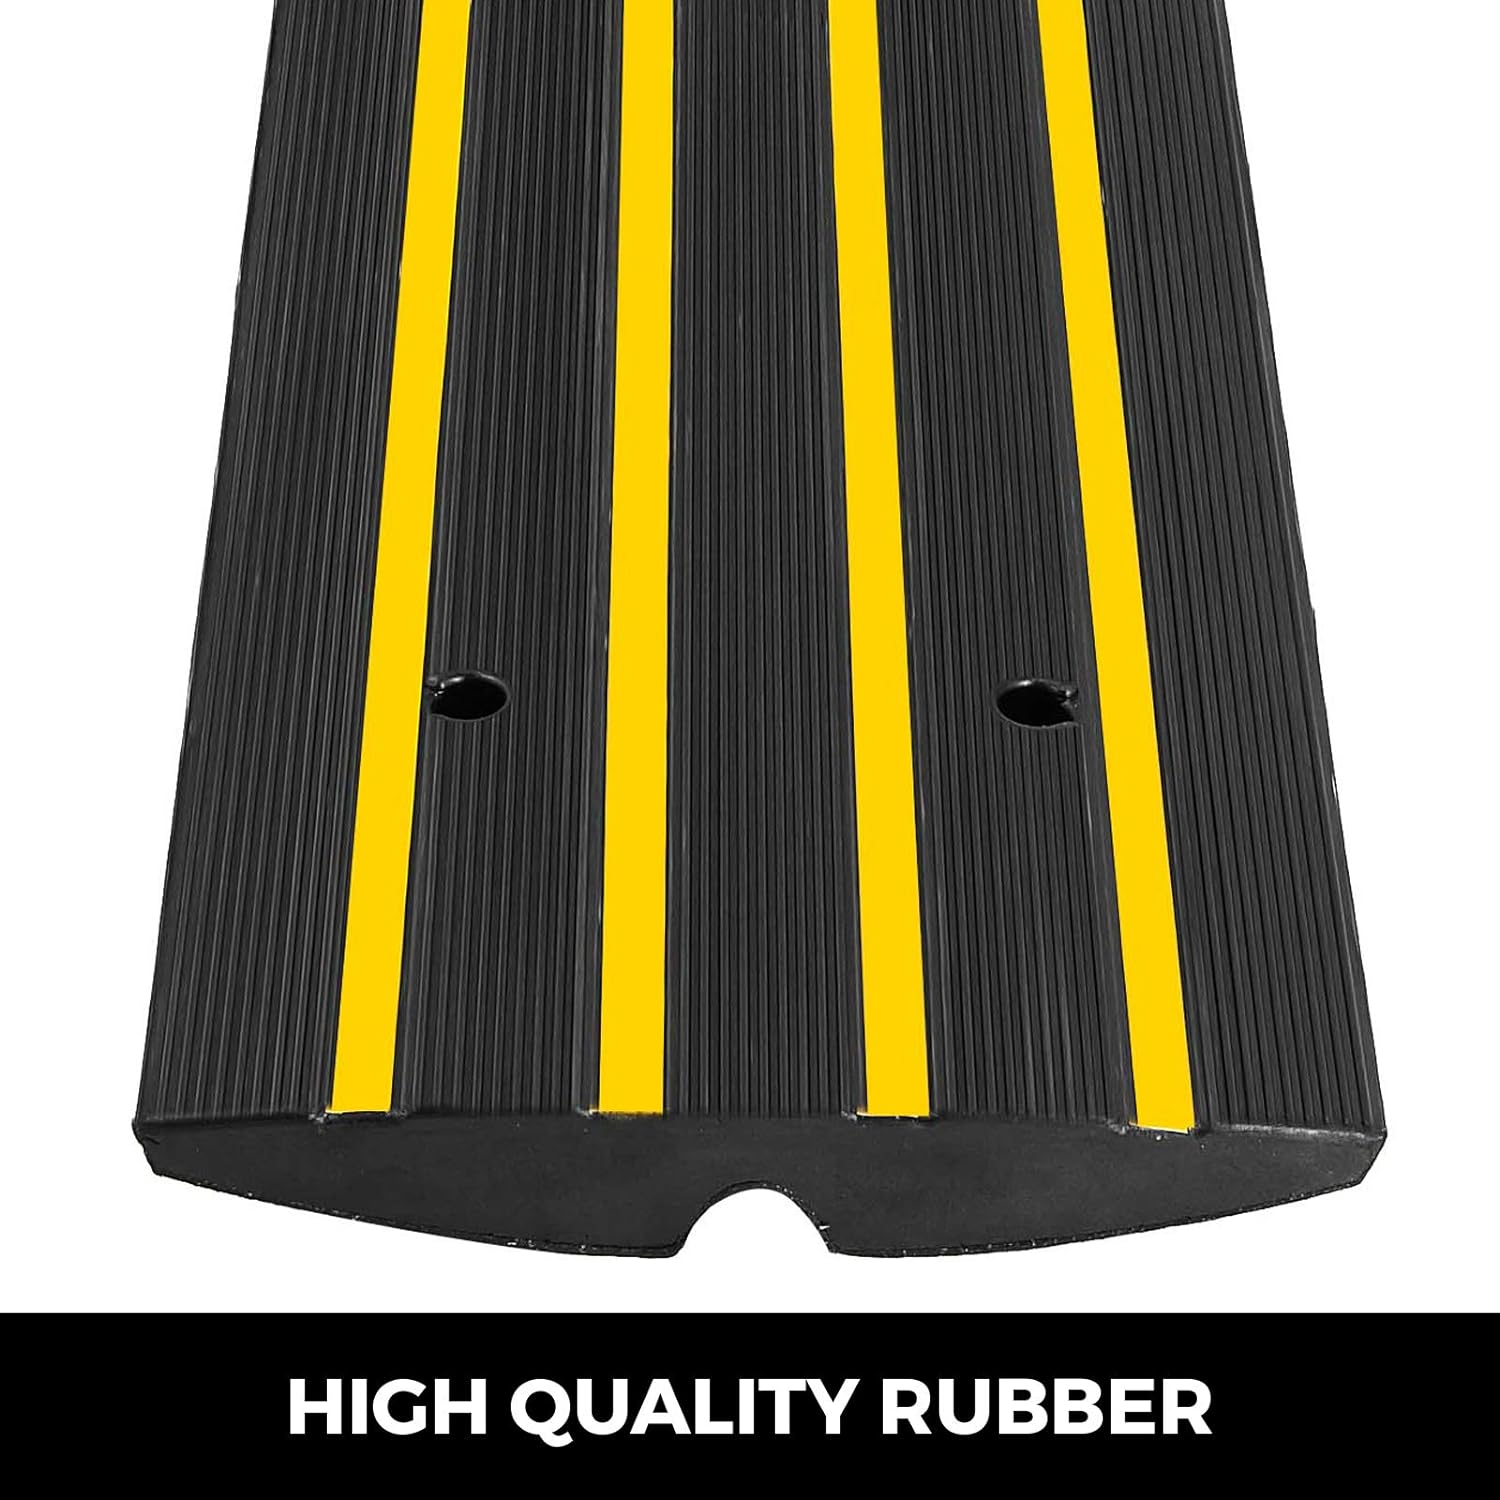 Happybuy iSH09-M772506mn Car Driveway Rubber Curb Ramps Heavy Duty 22000lbs  Capacity Threshold Ramp 2.5 Inch High Cable Cover Curbside Bridge Ramp for L